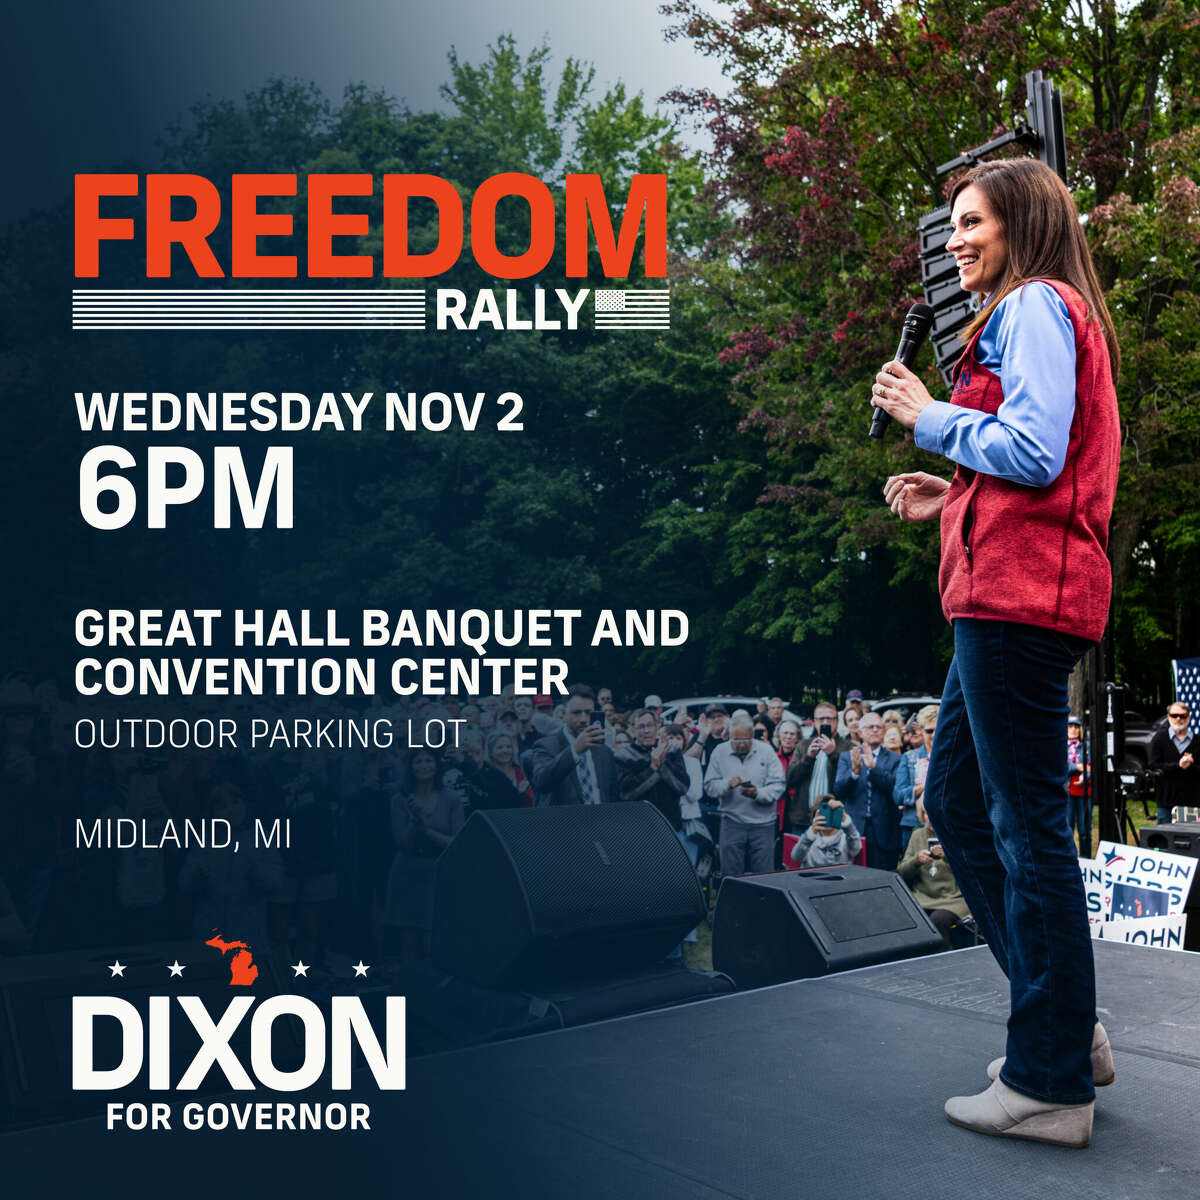 A freedom rally will be held at 6 p.m. on Wednesday, Nov. 2, 2022 at the Great Hall and Banquet Center in Midland. 